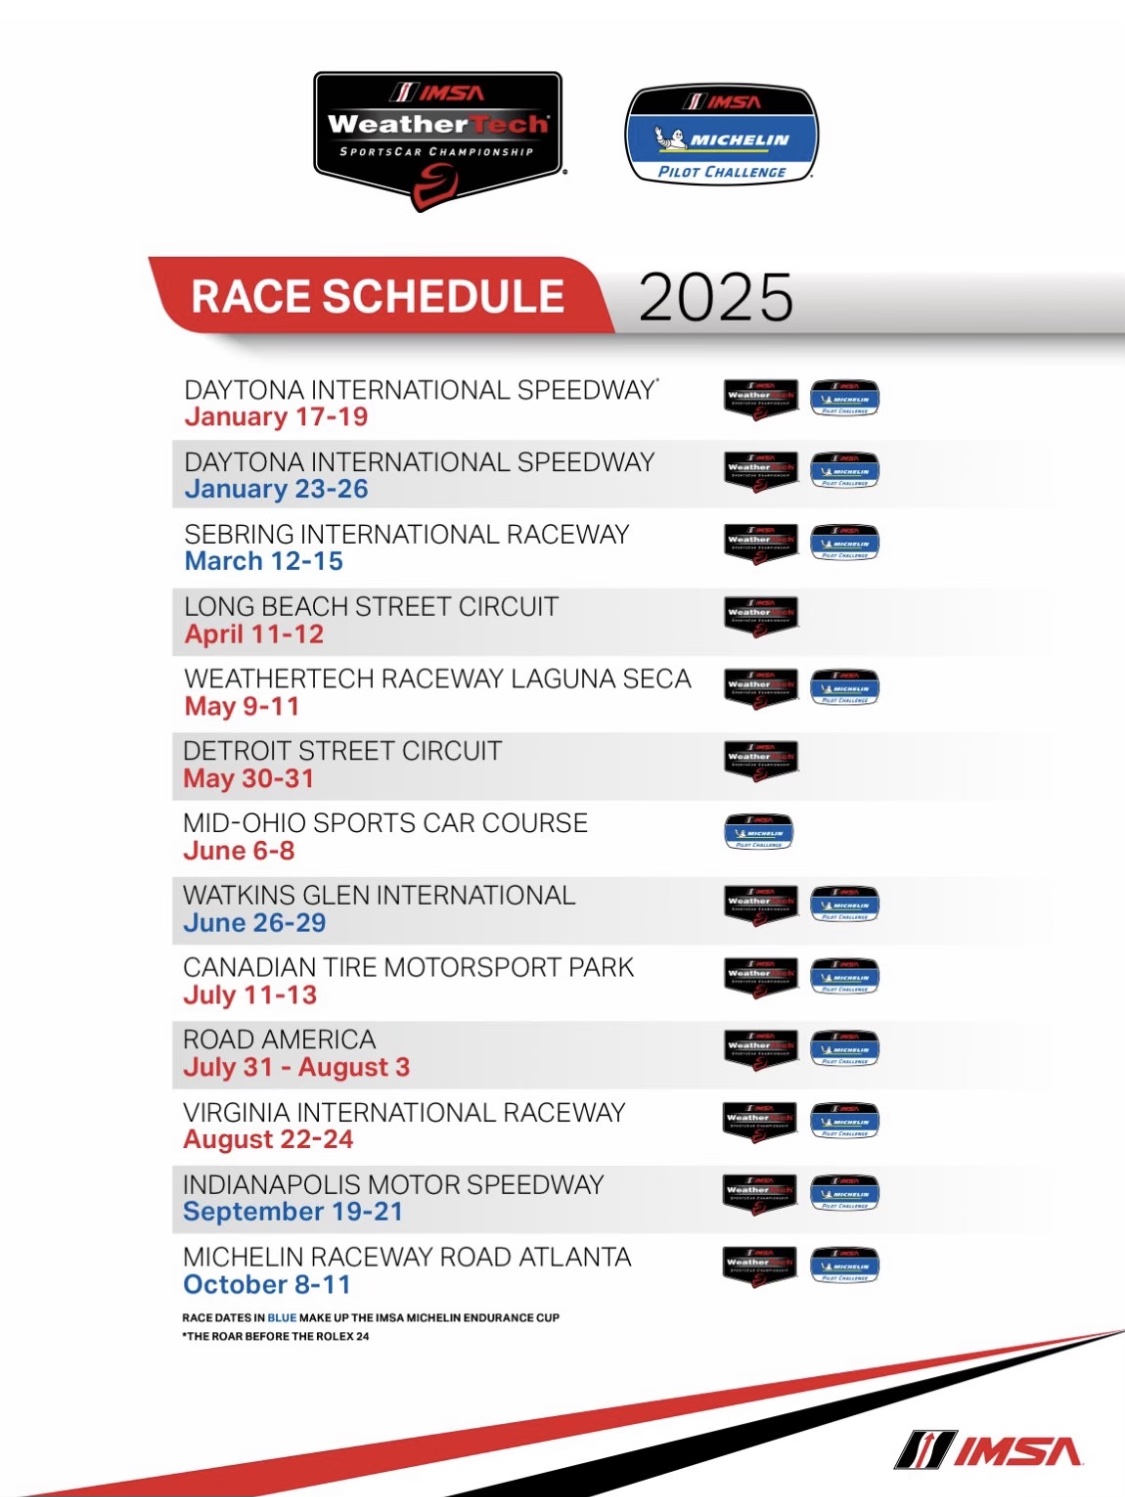 In addition to the action on the track, we also got a surprise announcement from IMSA with the 2025 racing schedule! This is incredibly early in the year to do this, but it shows the strength and momentum that IMSA has with its teams and stakeholders. 